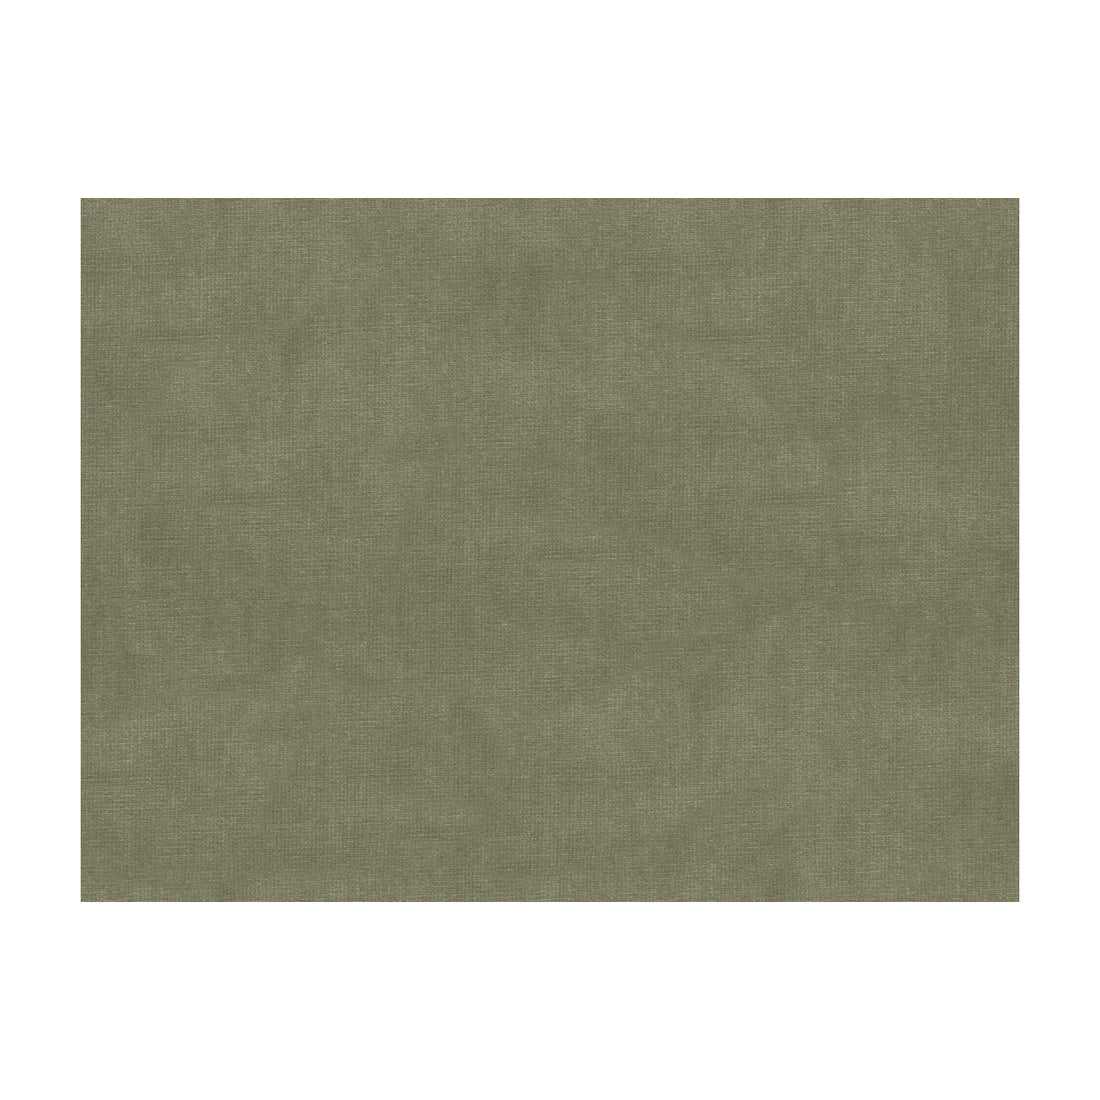 Charmant Velvet fabric in pebble color - pattern 8013150.2311.0 - by Brunschwig &amp; Fils